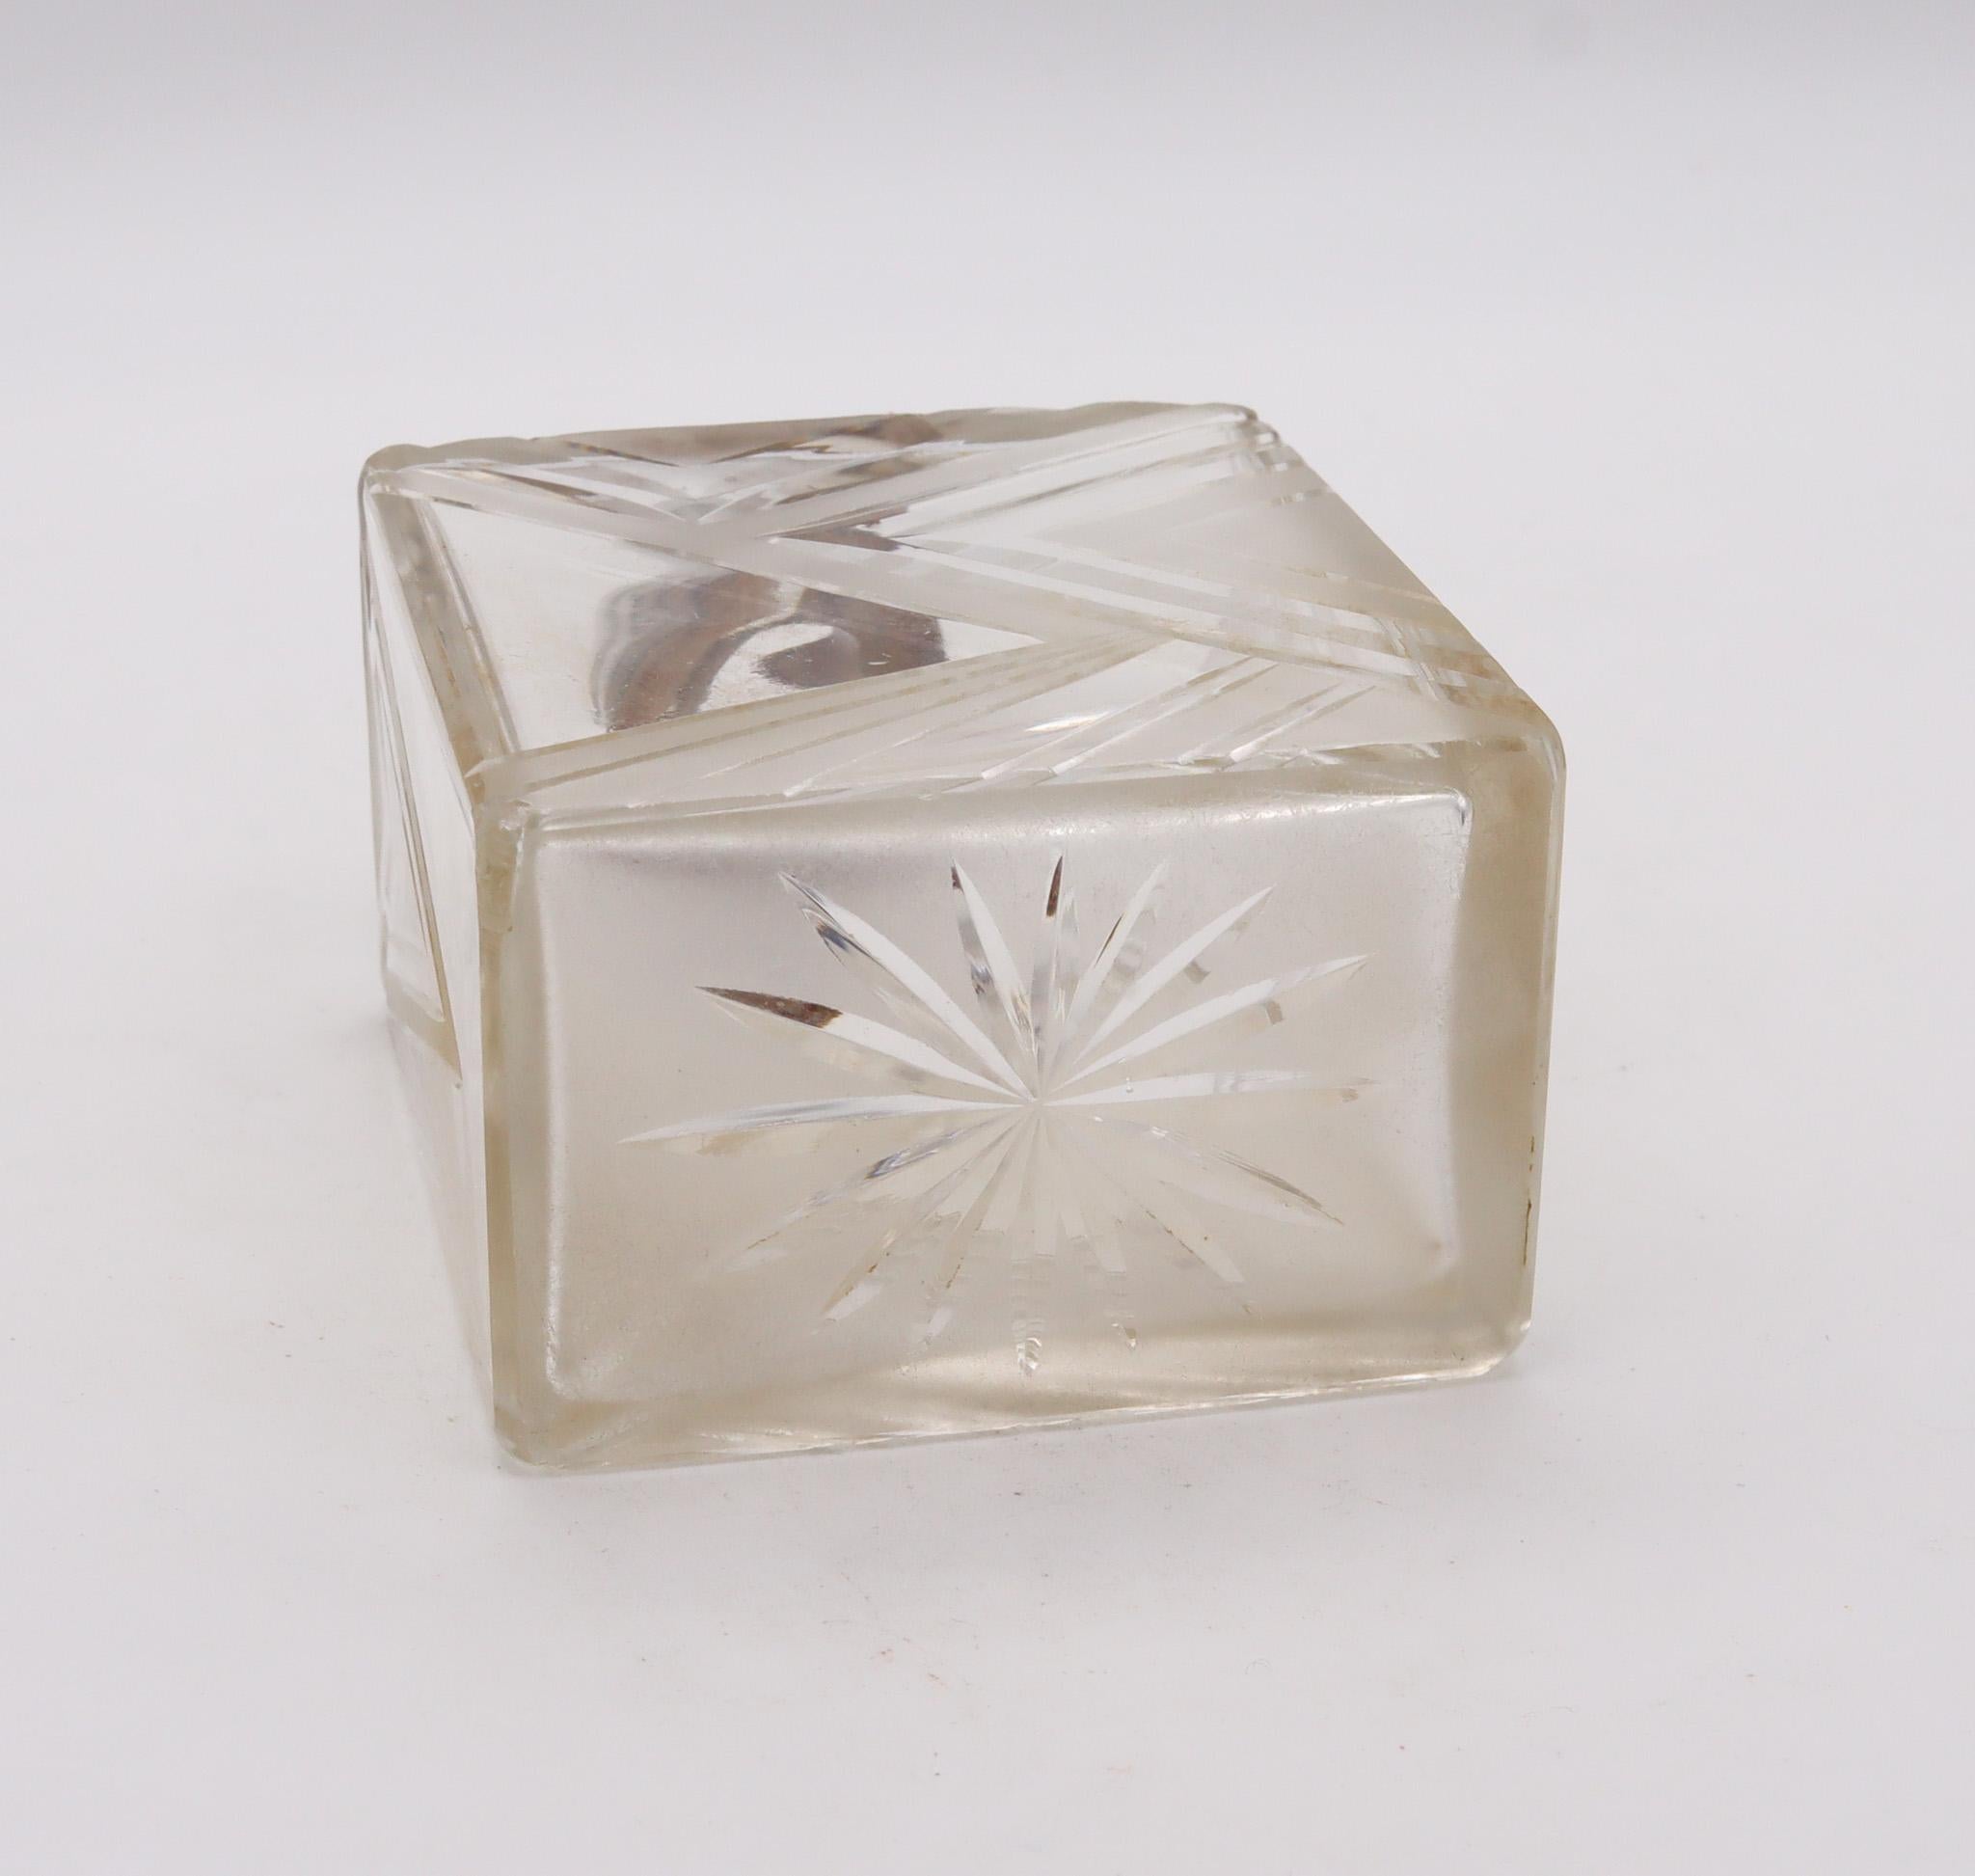 Victor Leneuf 1925 French Art Deco Geometric Glass Perfume Bottle .950 Silver In Good Condition For Sale In Miami, FL